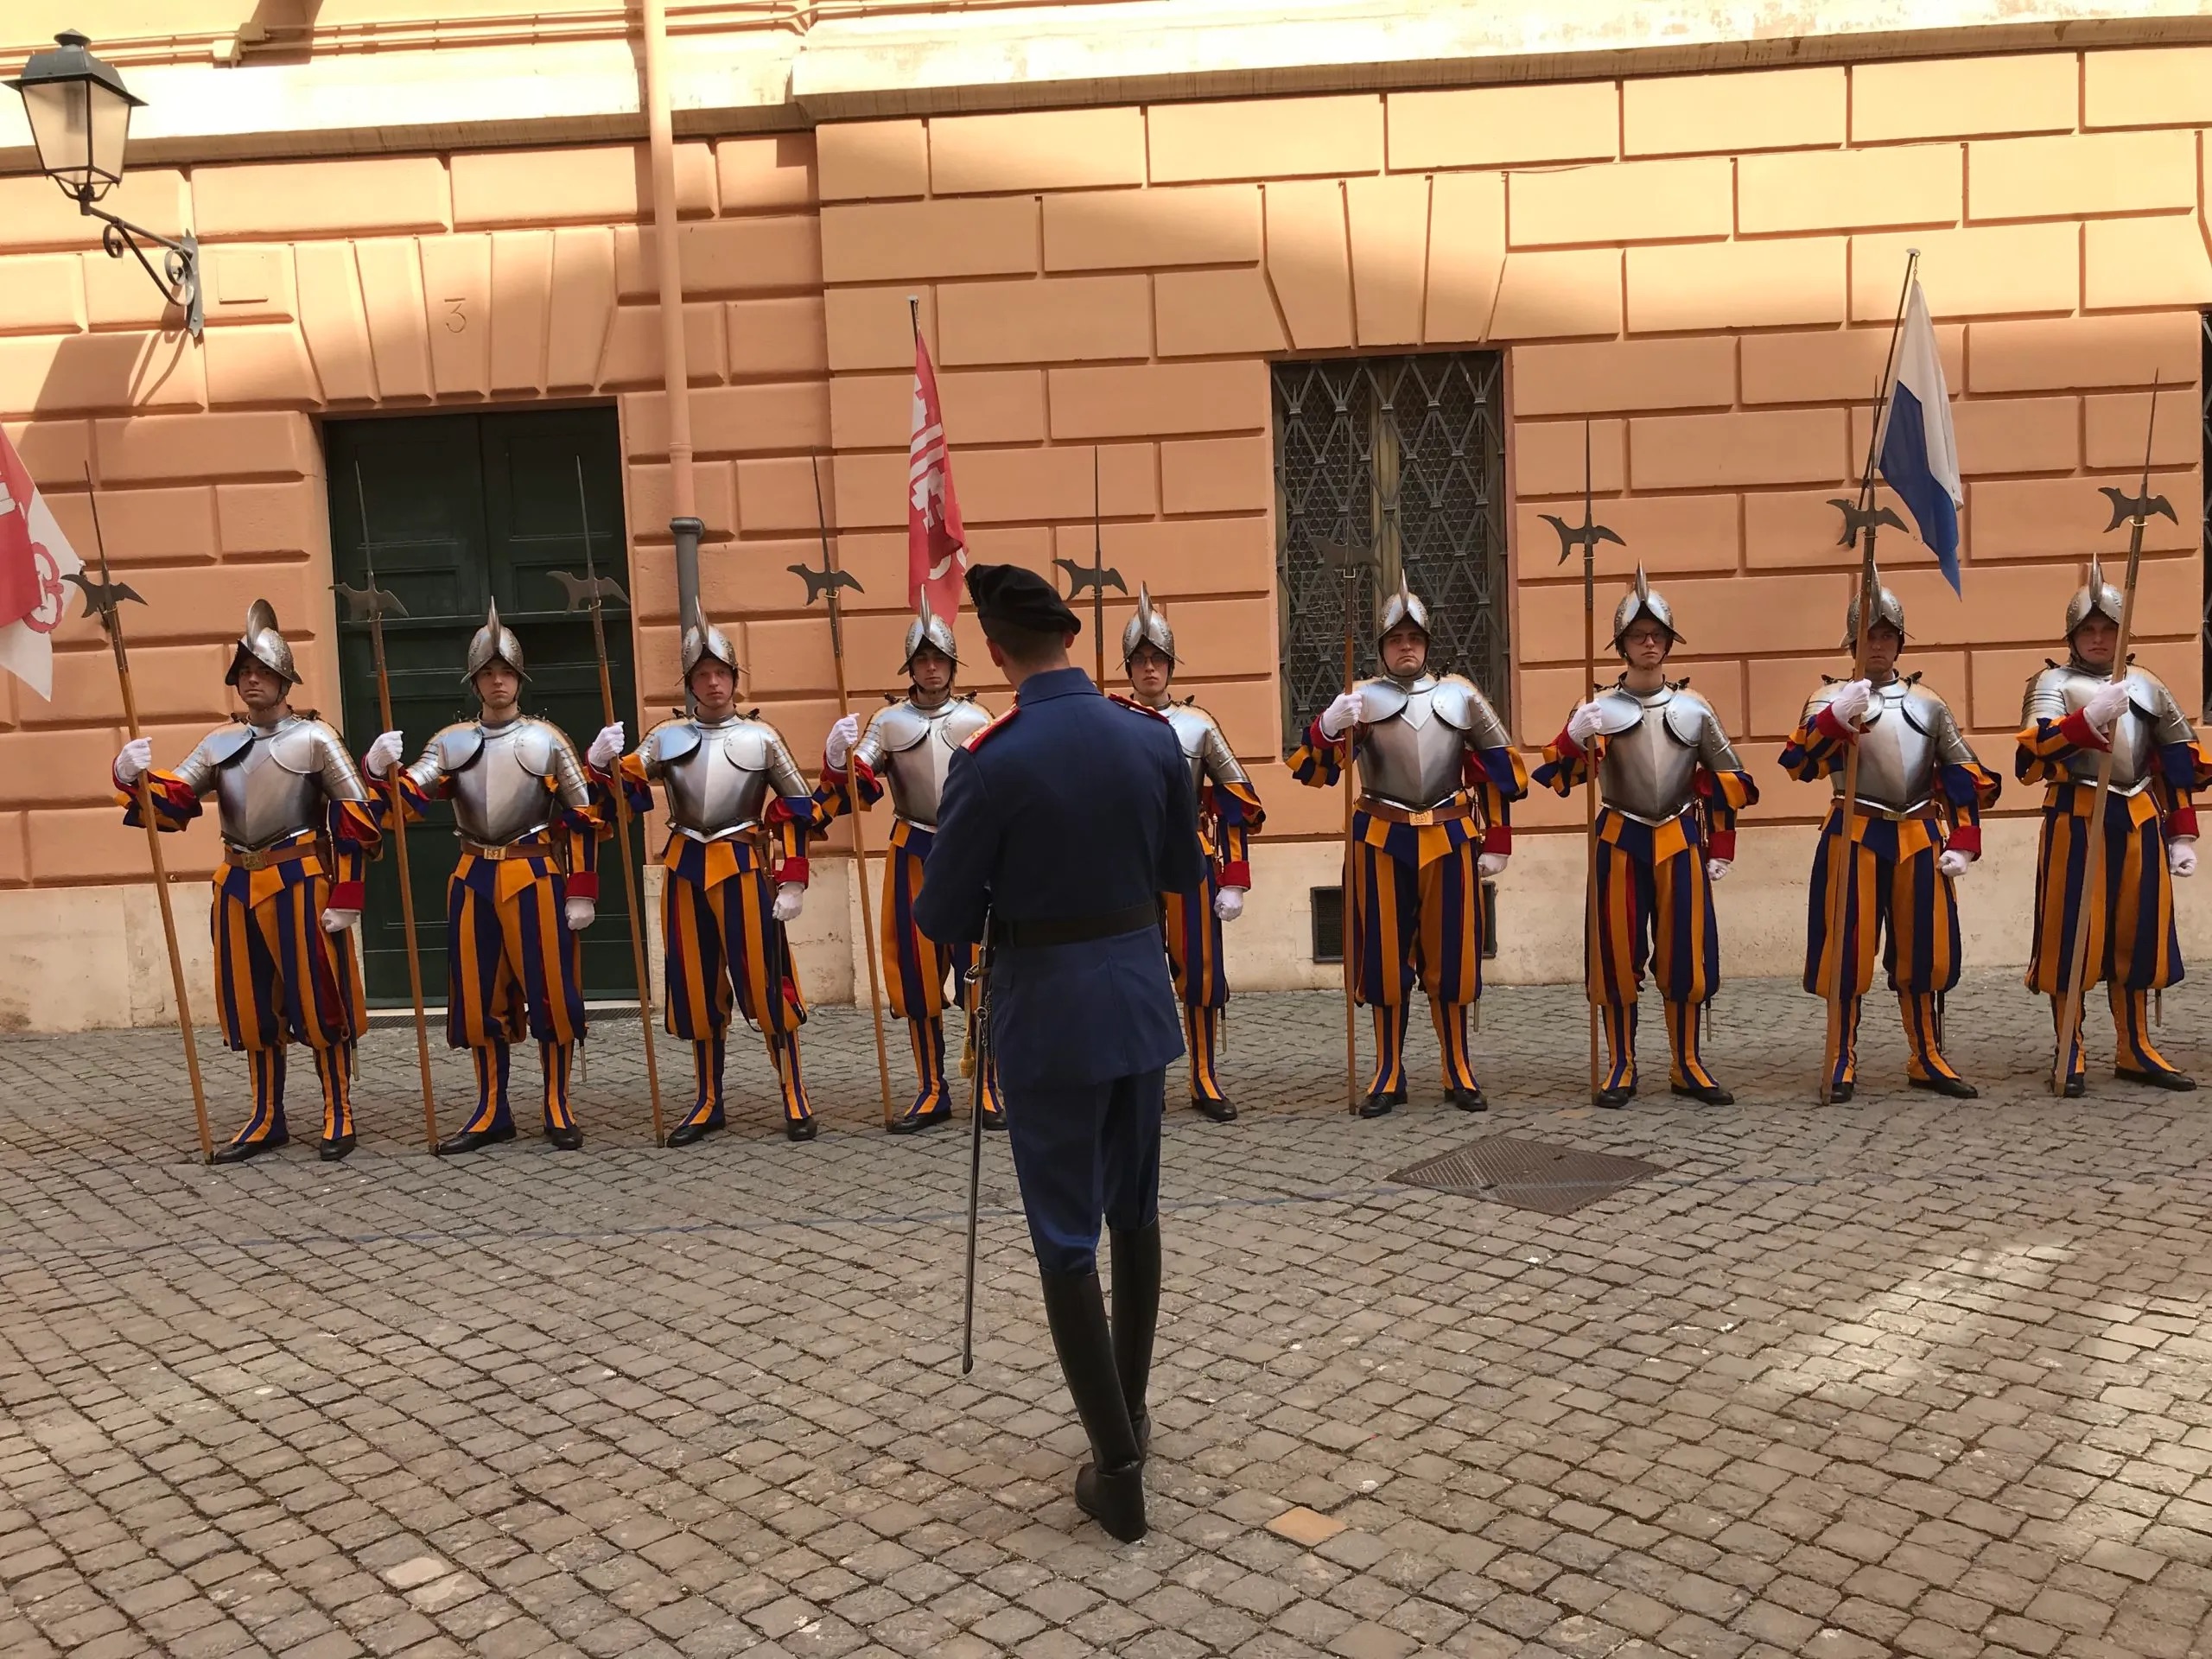 The vice-commander of the Swiss Guard trains the young recruits.